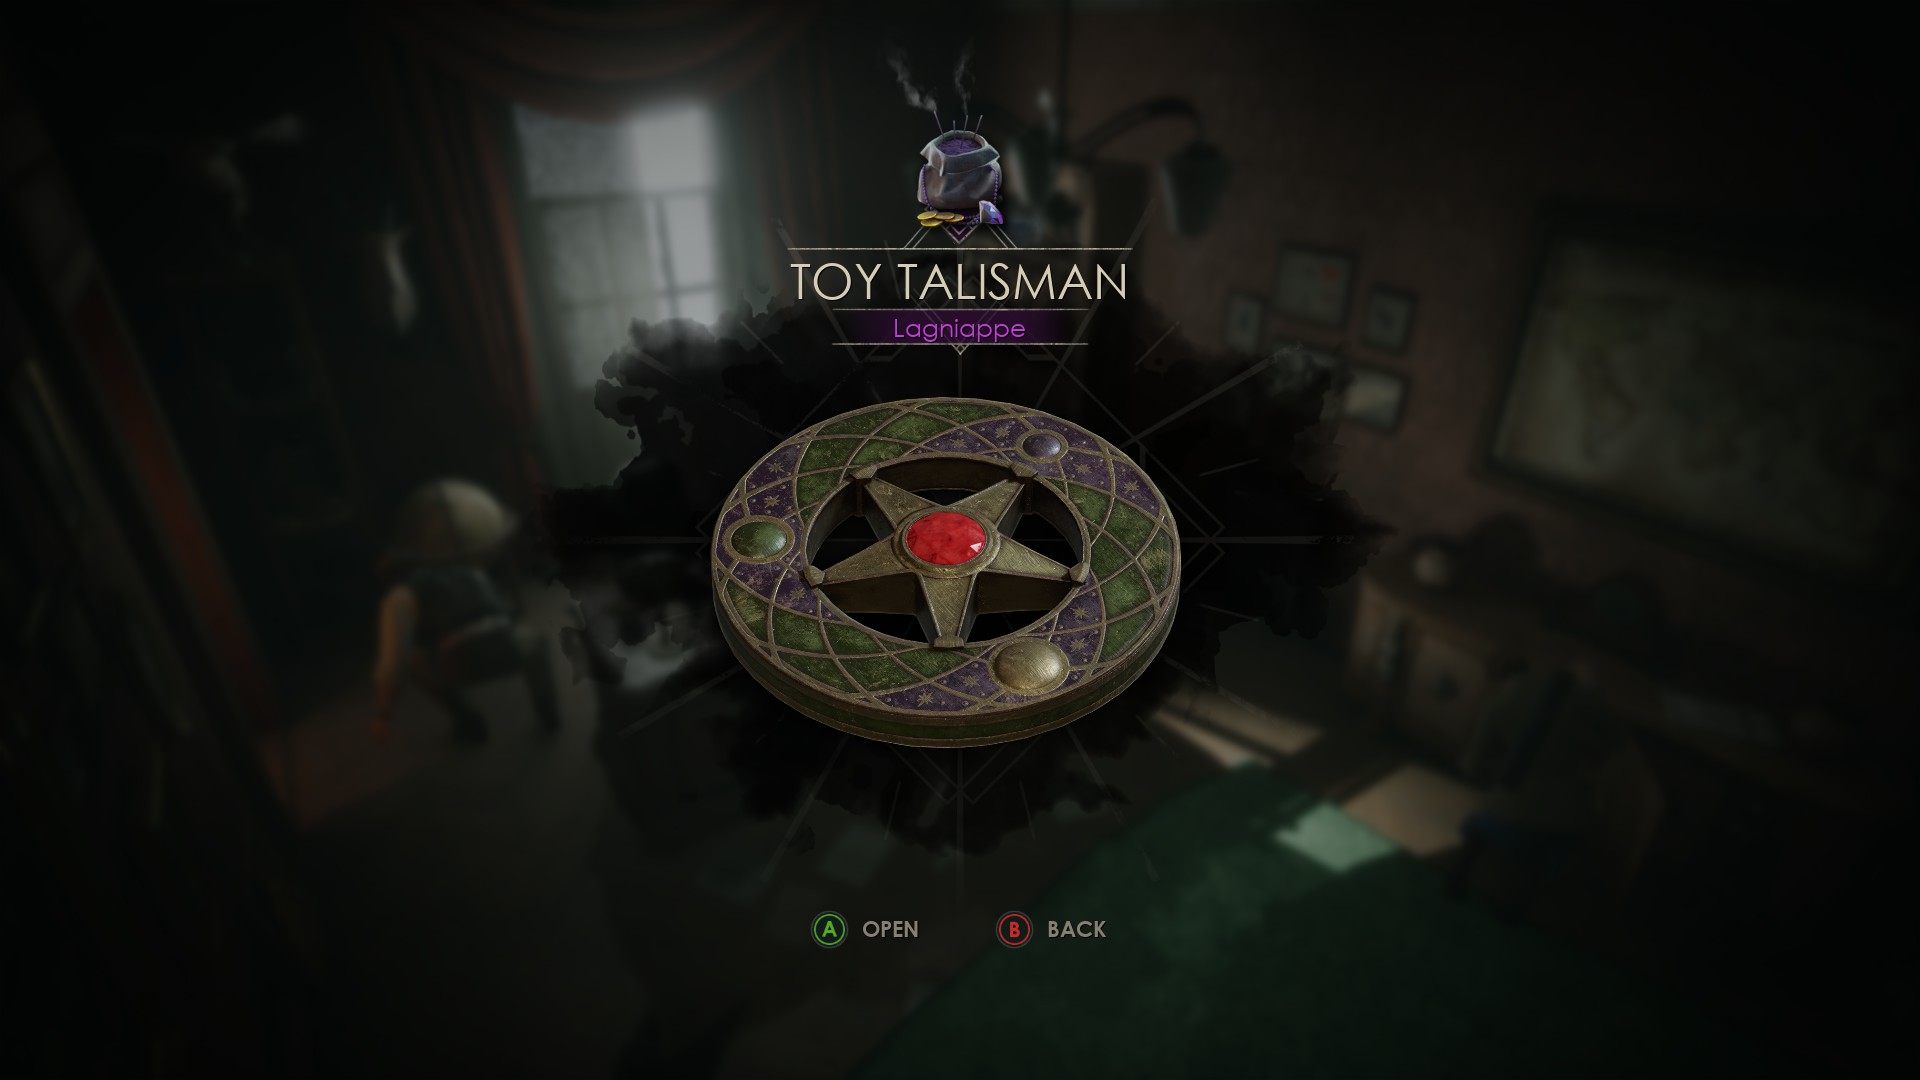 alone in the dark toy talisman featured image